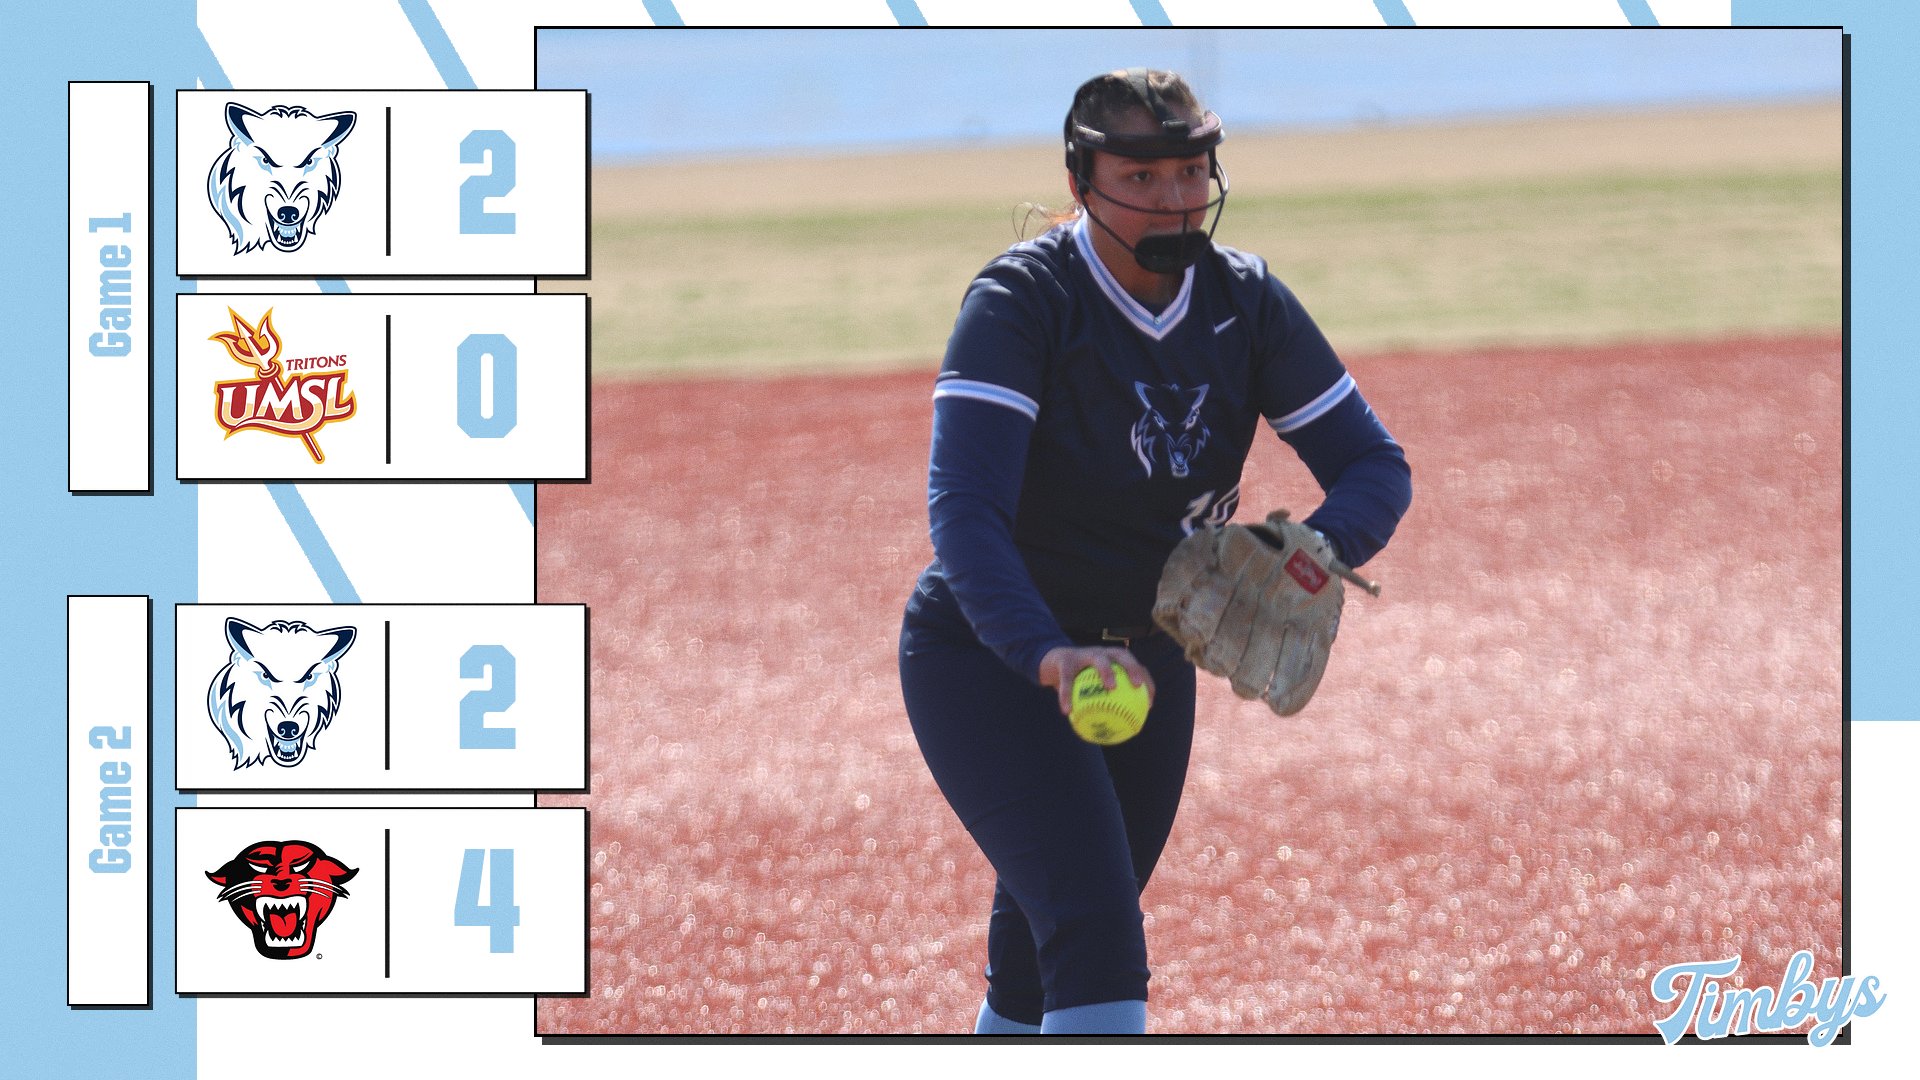 Softball Splits Final Day In Evansville, Ind. As Mutter Throws First Career Shutout